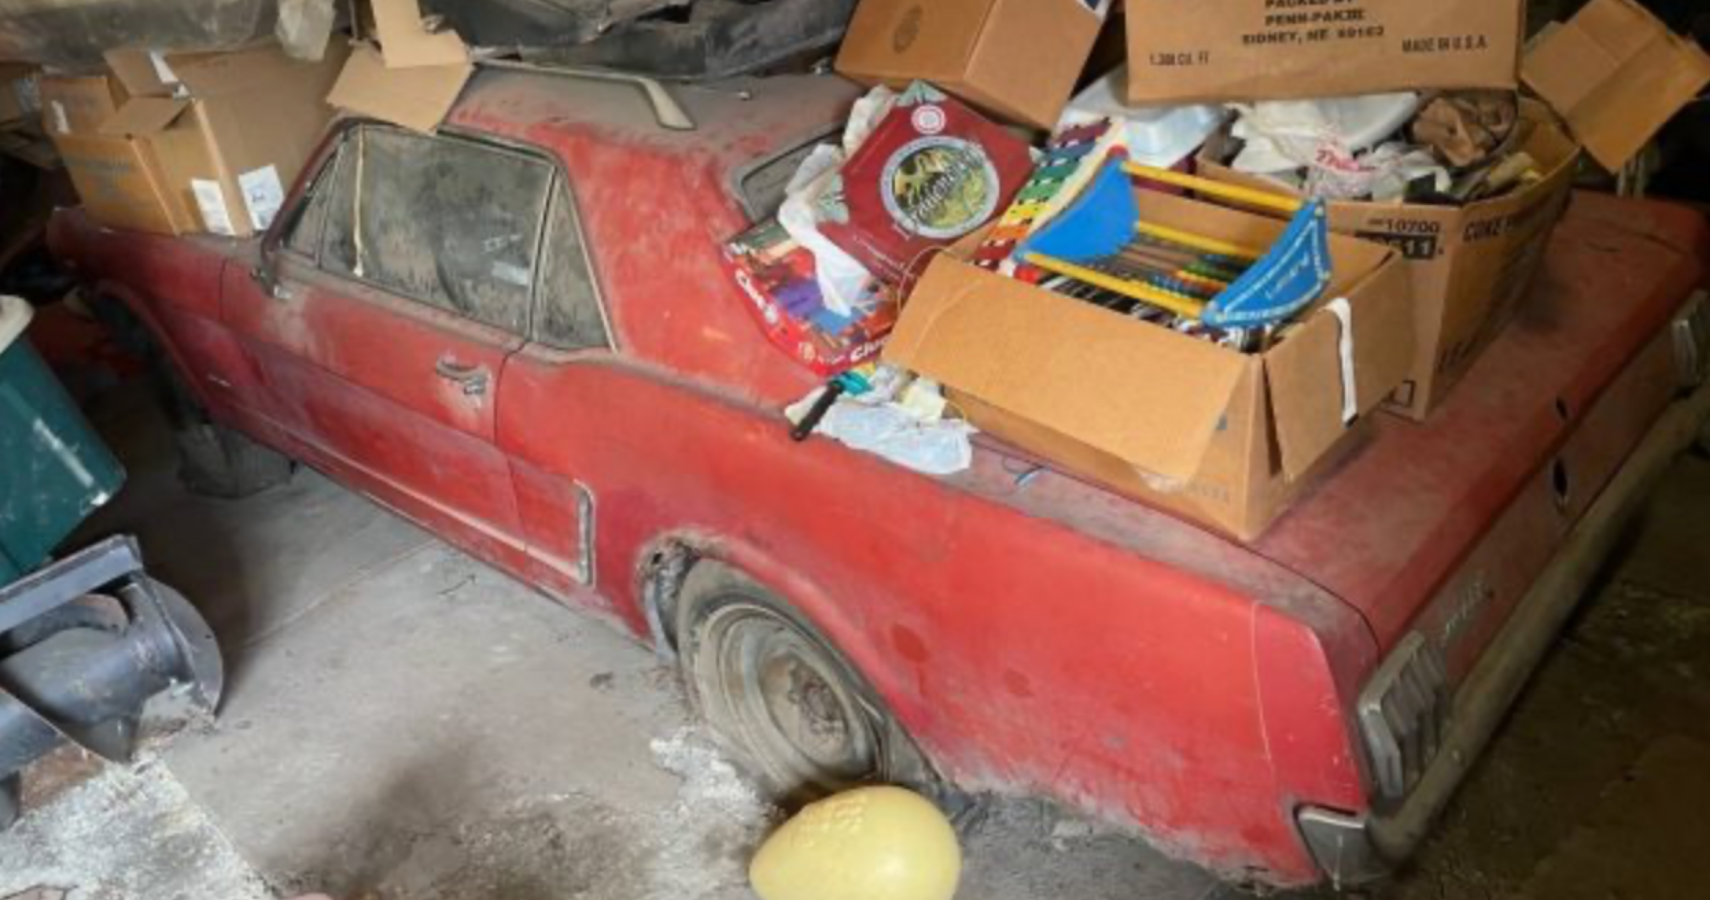 An abandoned classic Red Ford Mustang sits in a garage covered in boxes and dusted